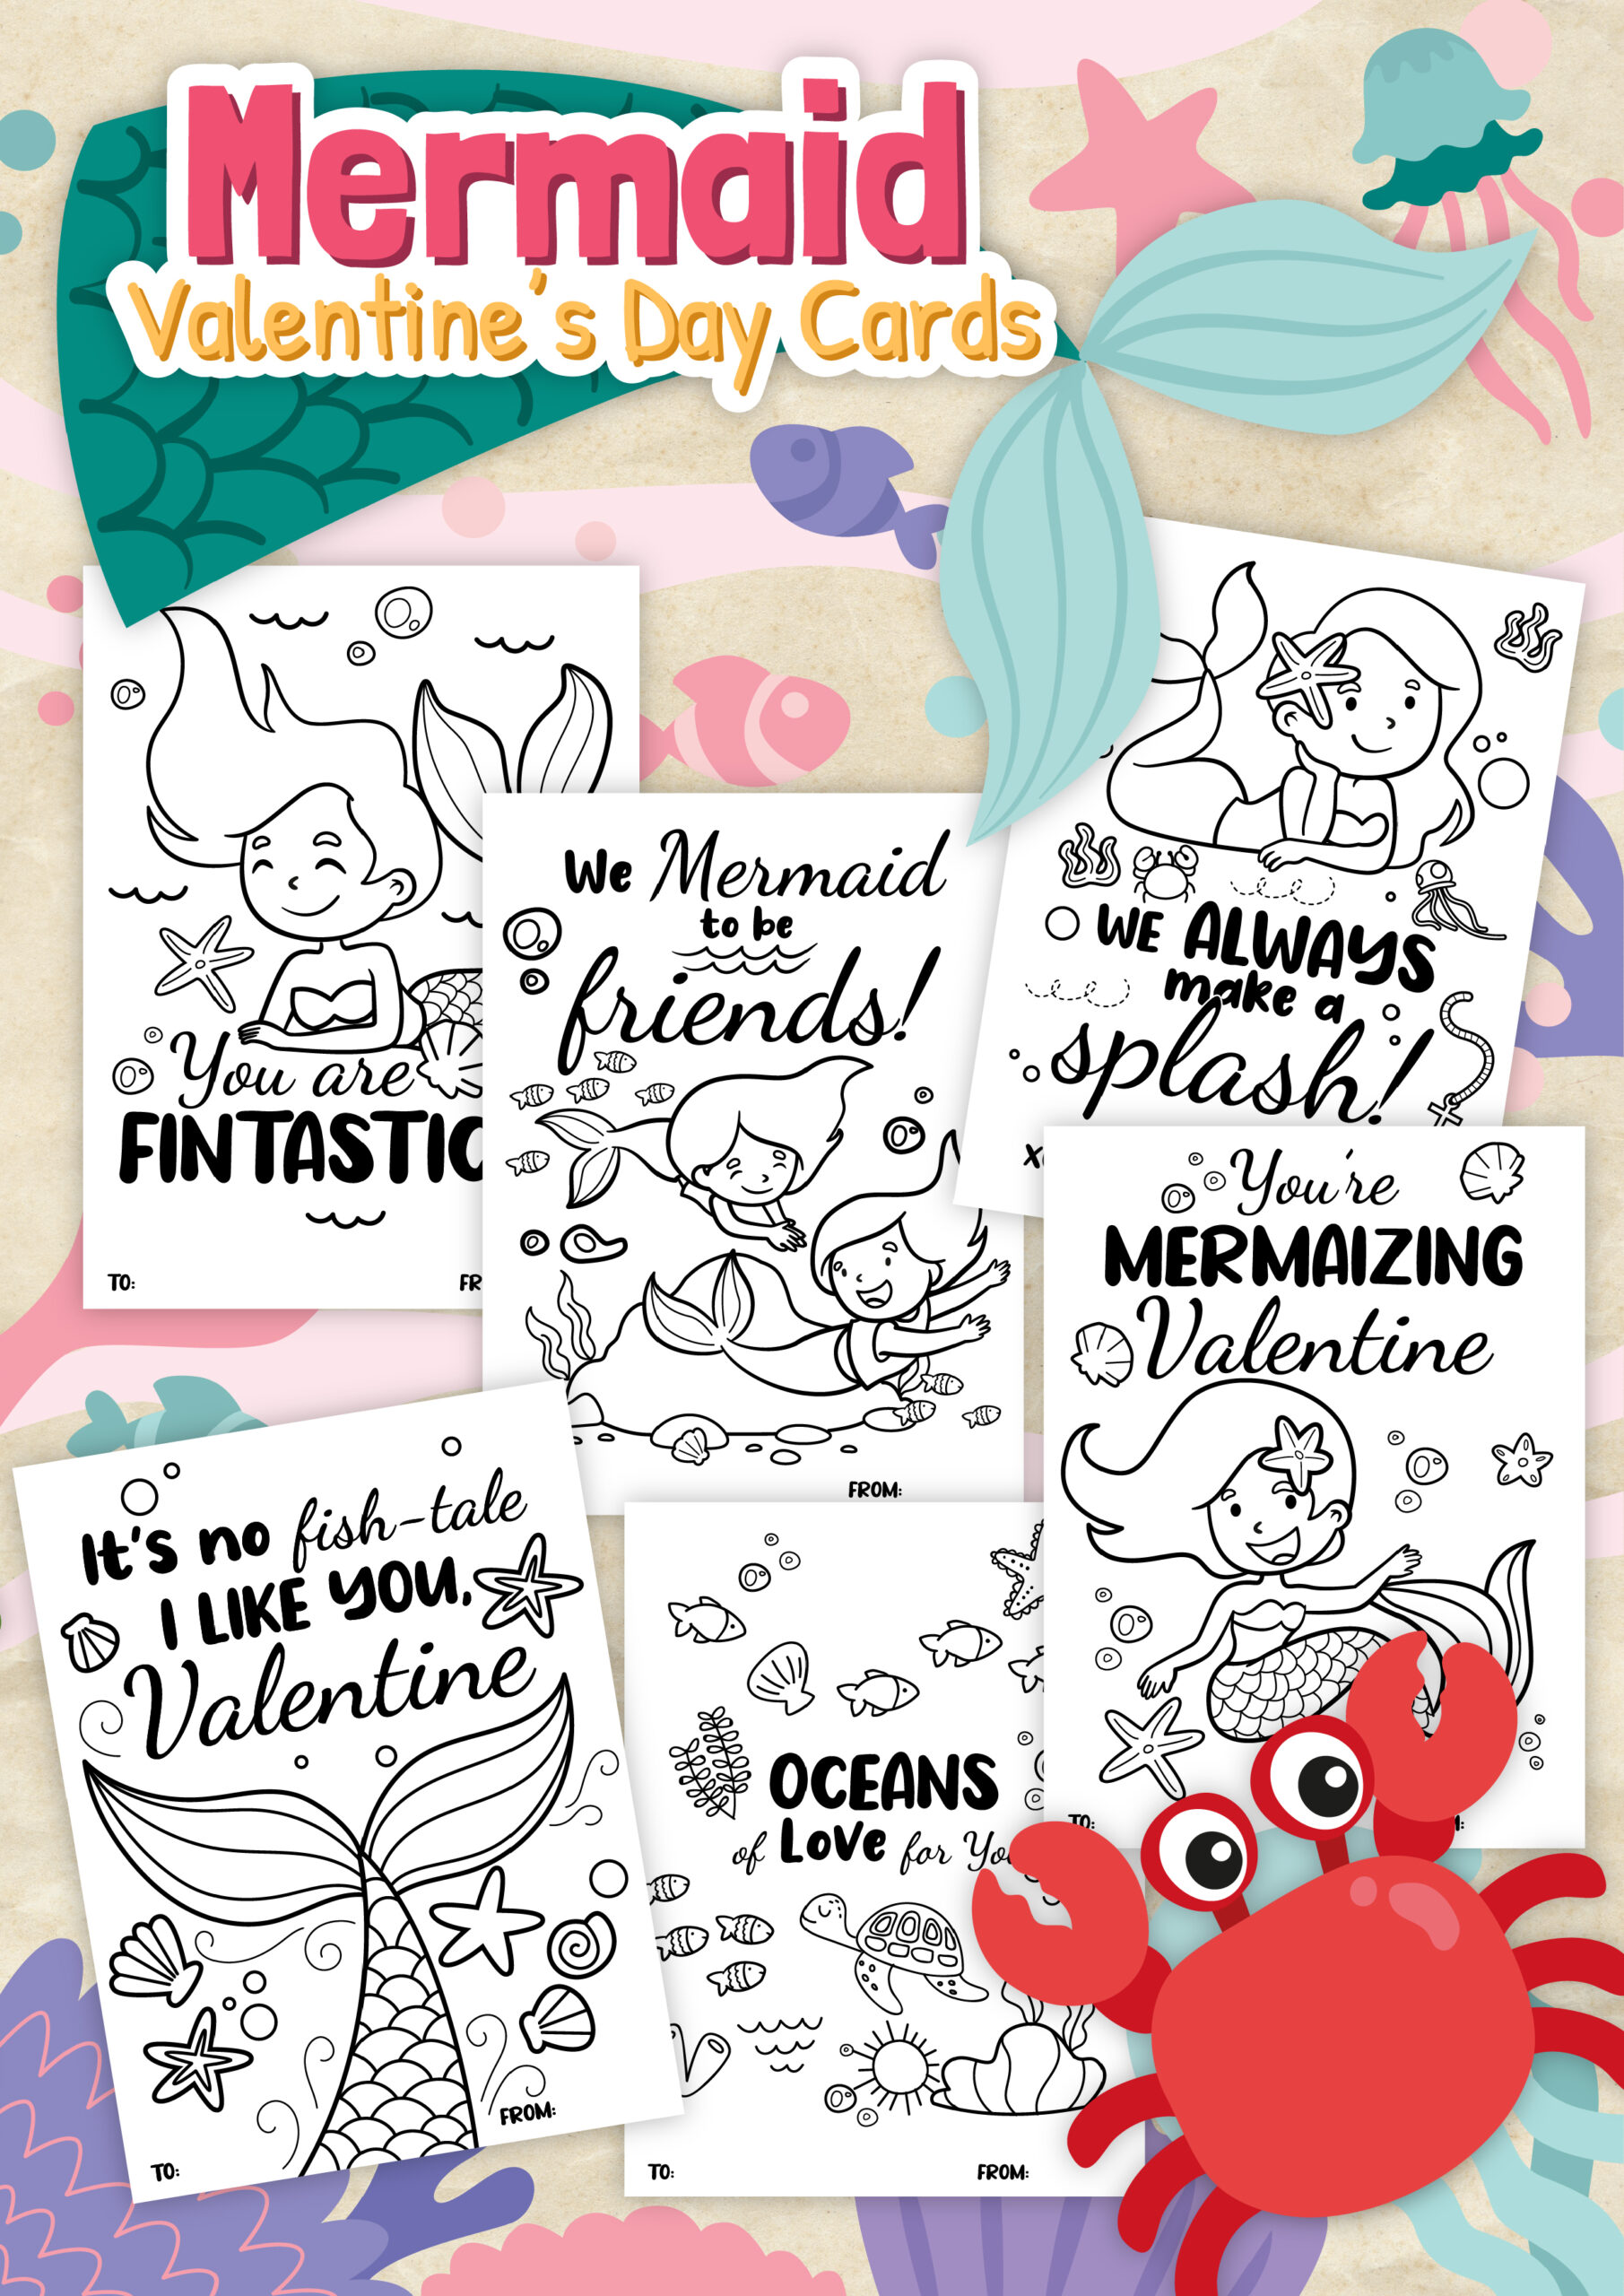 A collage of printable mermaid coloring Valentine's Day cards for kids. Fun Valentine sayings and cute mermaid drawings to color.